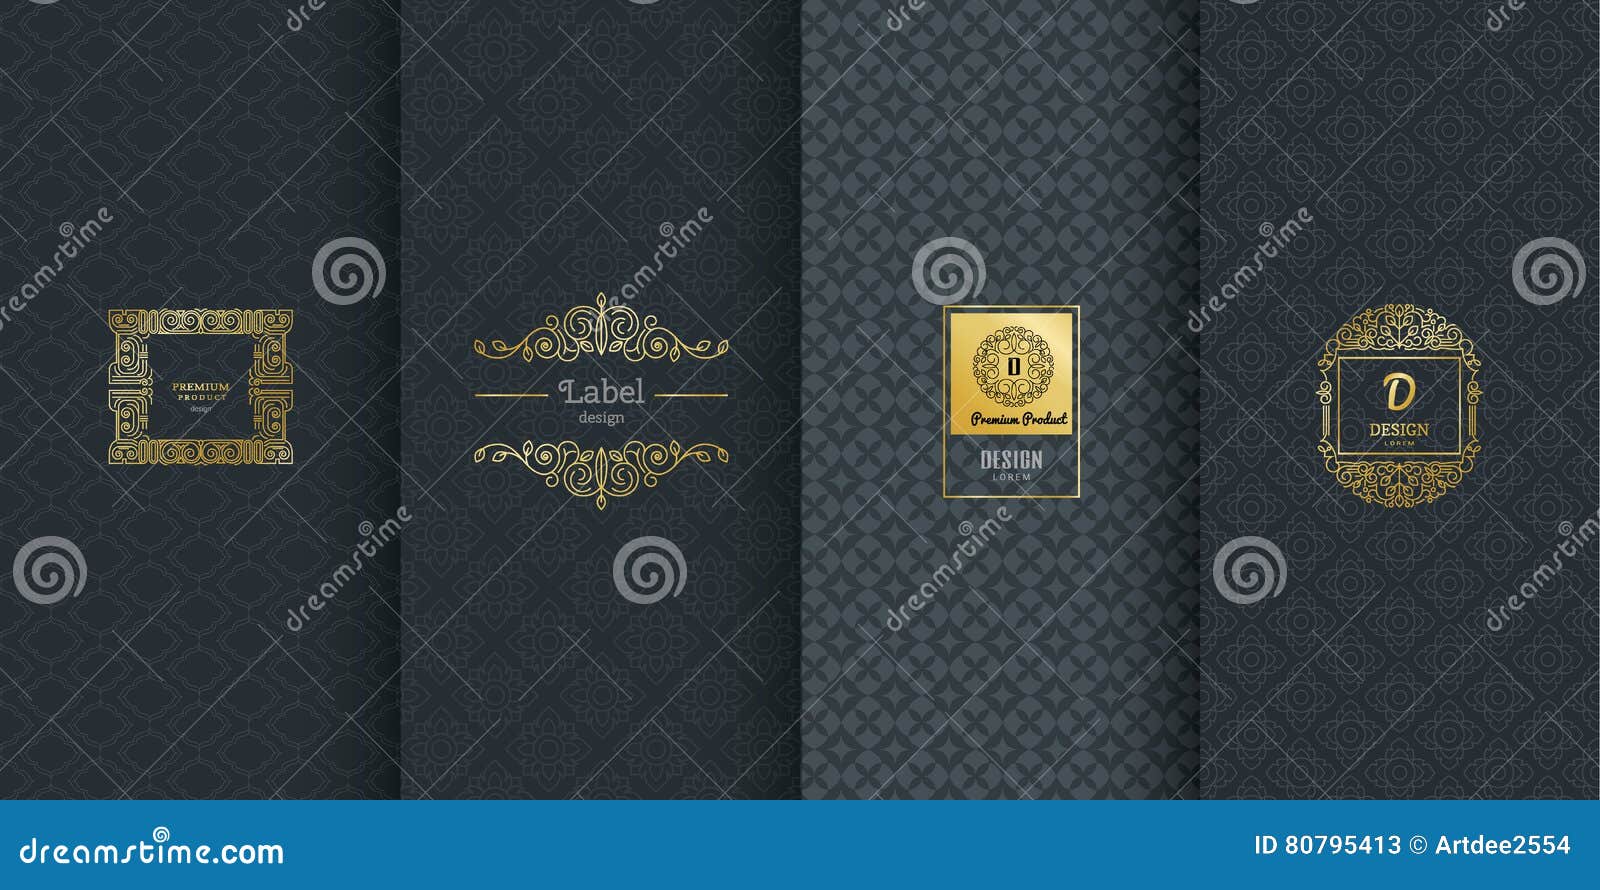 collection of  s,labels,icon,frames, for packaging, of luxury products.made with golden foil. on black